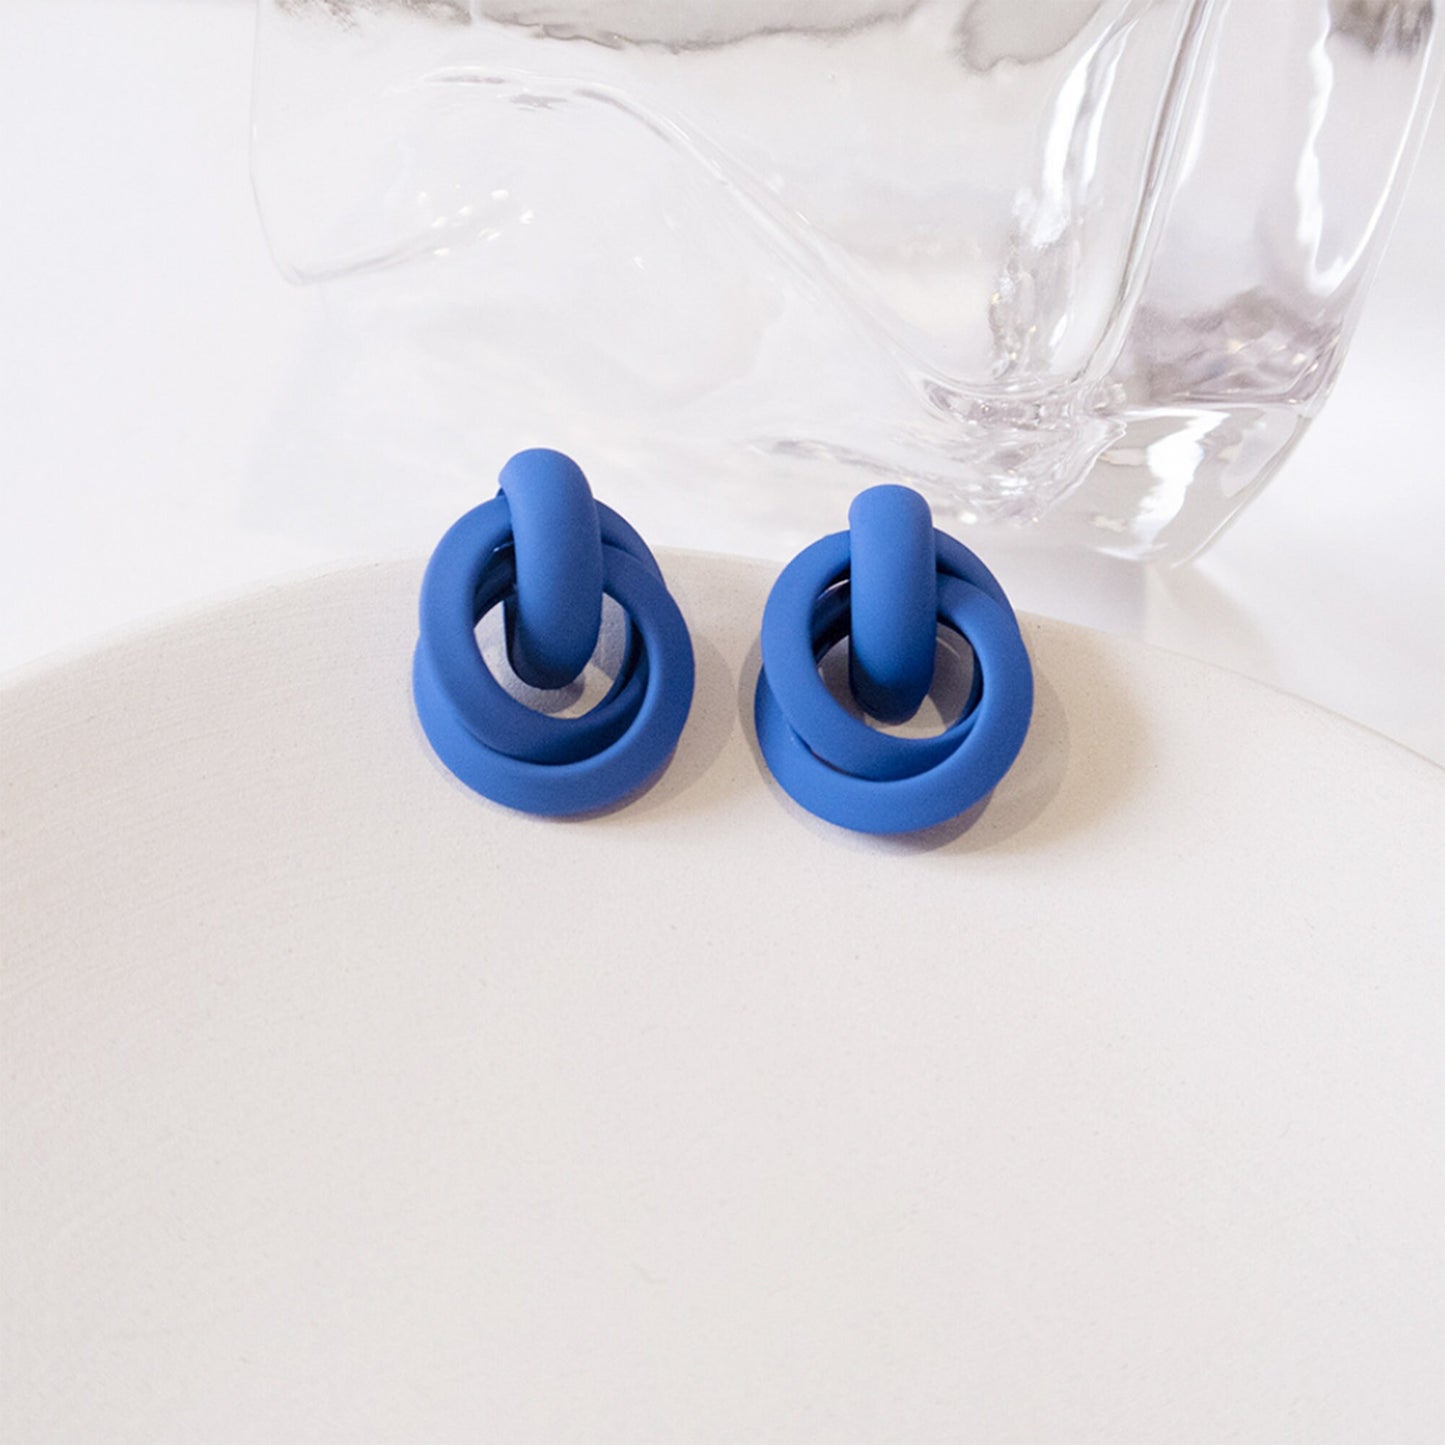 Blue 3D Loop Knots Large Stud Earrings Blue Ivory White Silver Posts Clay Statement Earrings Polymer Clay Earrings